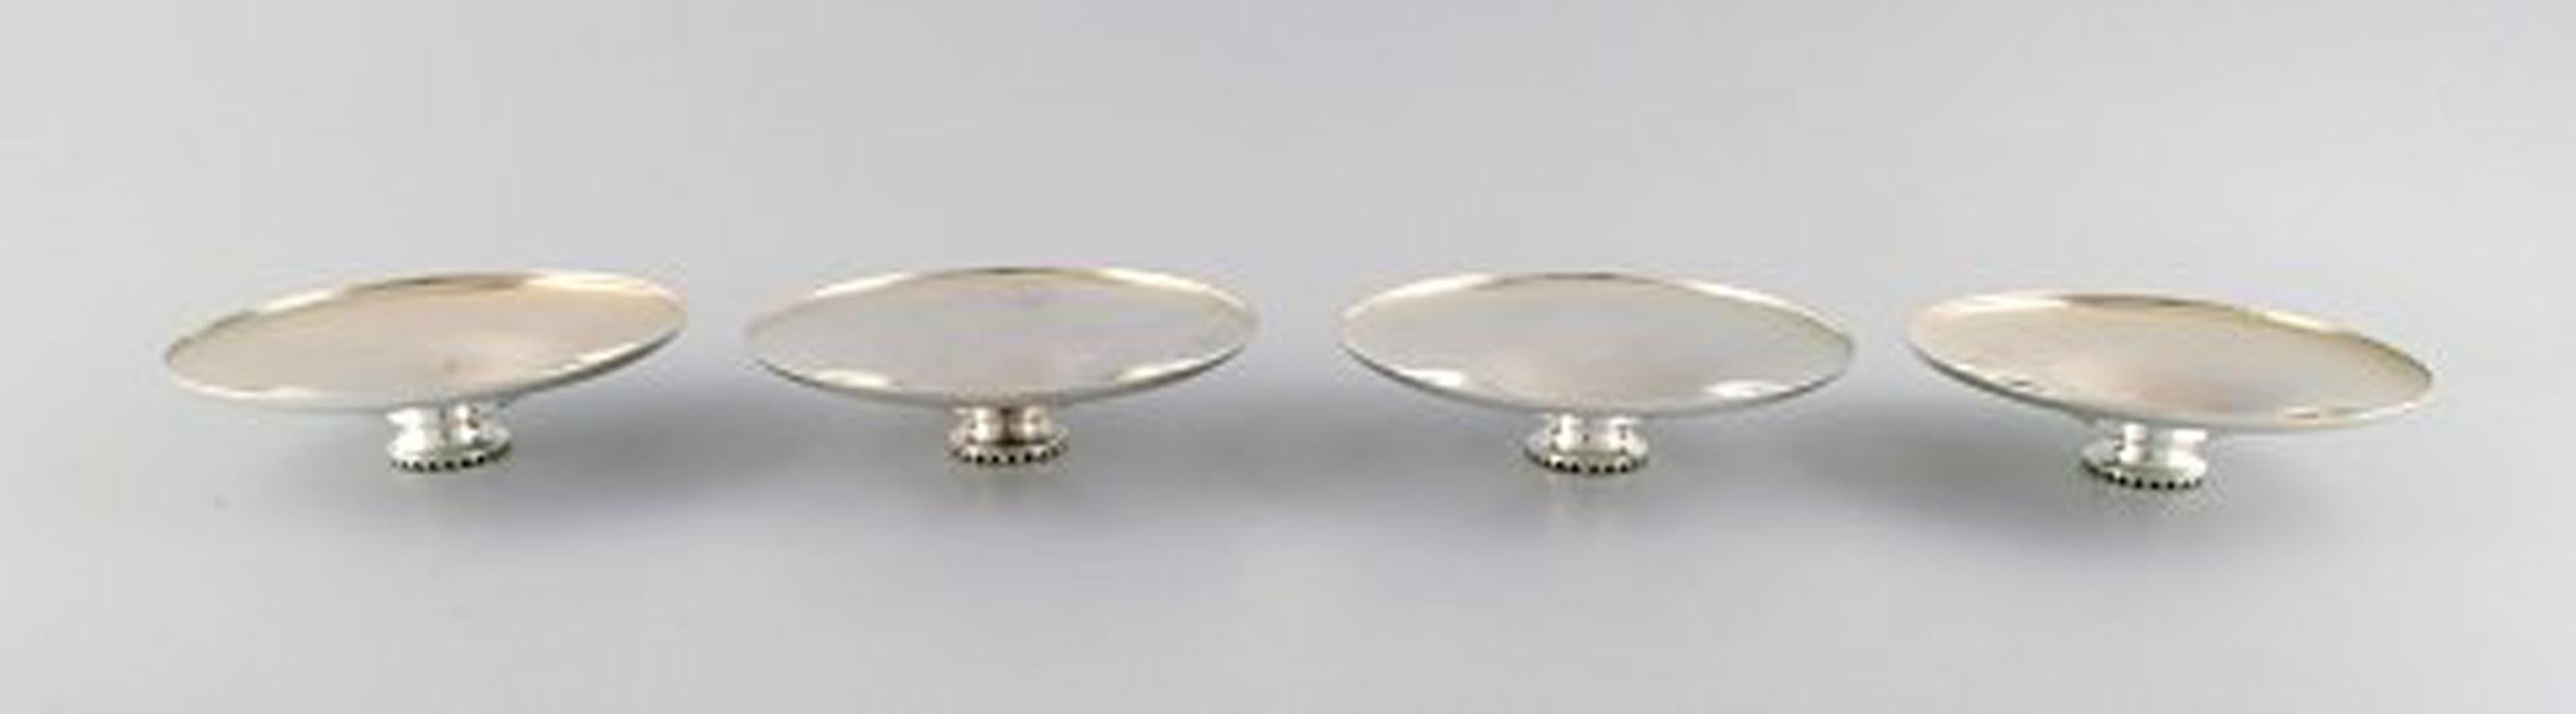 Suzuyo. A set of 4 Japanese low silver bowls on foot. Sterling silver.
In very good condition.
Unstamped.
Measures: 14 cm x 4 cm.